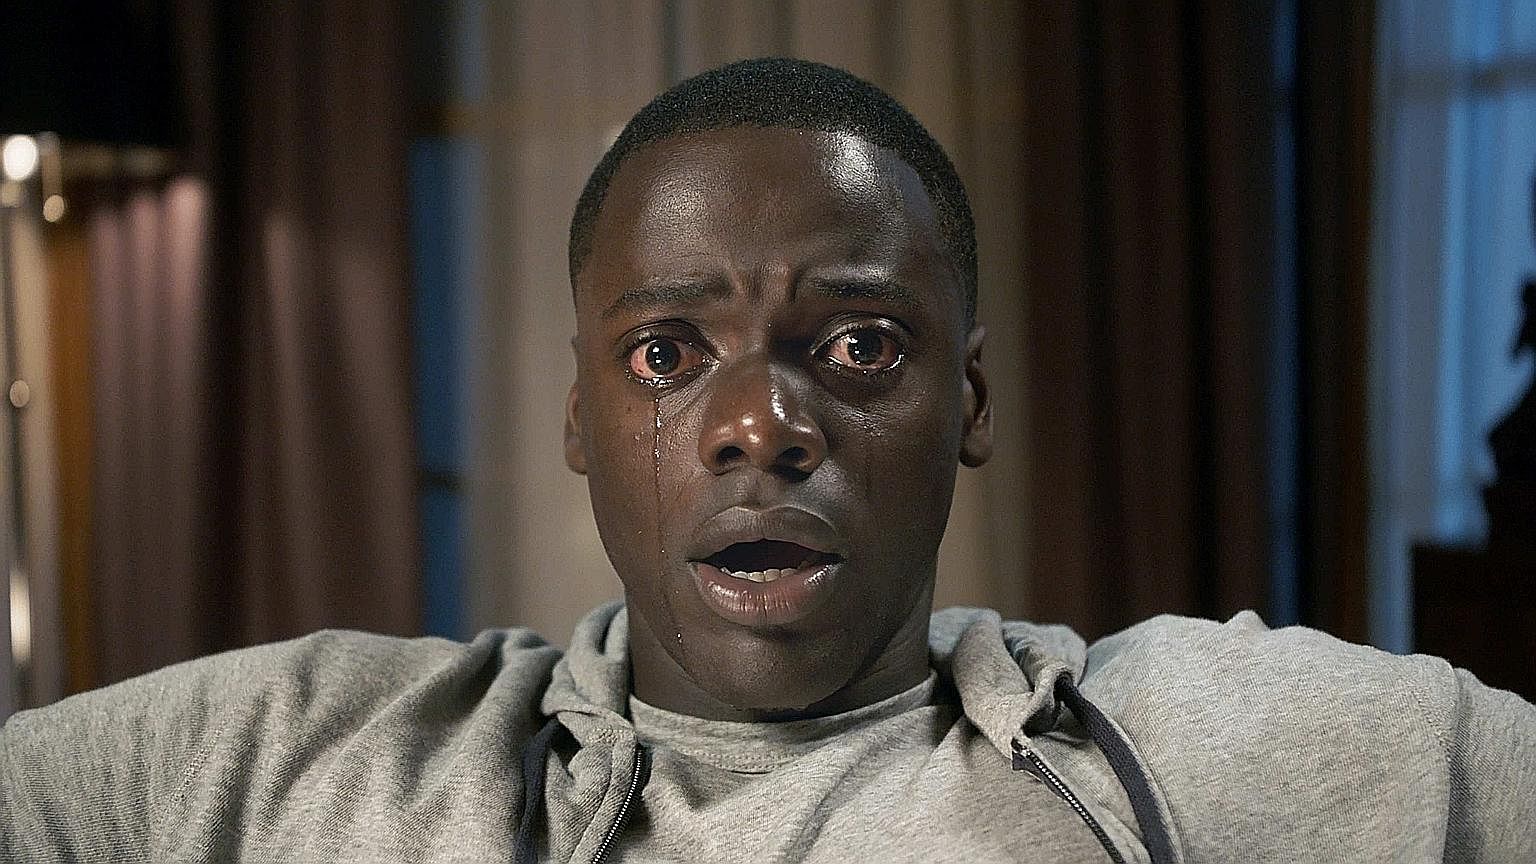 Daniel Kaluuya plays a man whose life takes a horrific turn after visiting his white girlfriend’s liberal parents in the thriller, Get Out. 